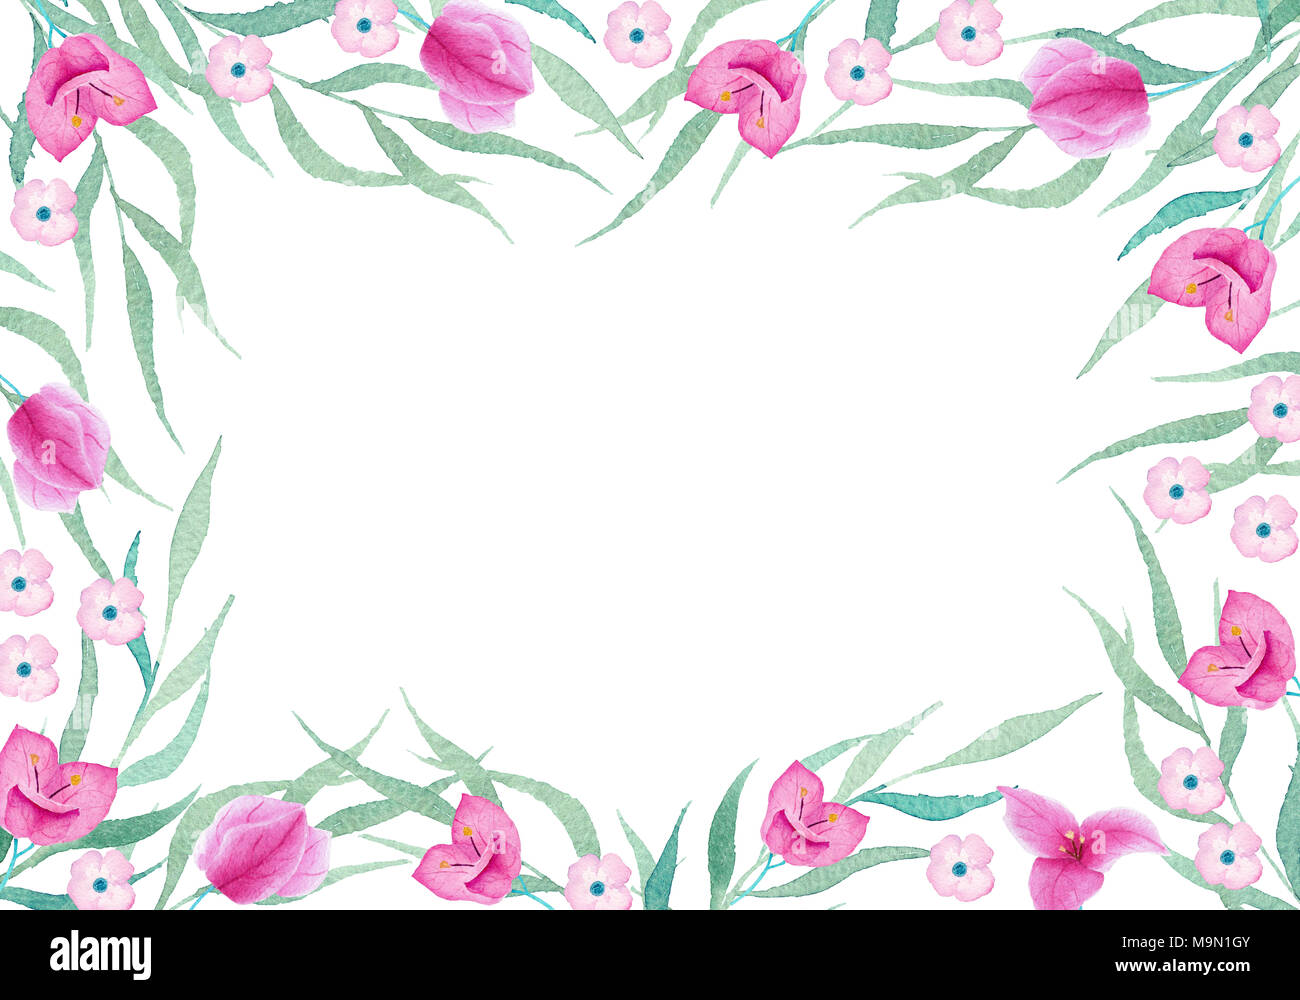 Watercolor Hand Painted Floral Frame On White Background Can Use It For Your Message And Project Stock Photo Alamy